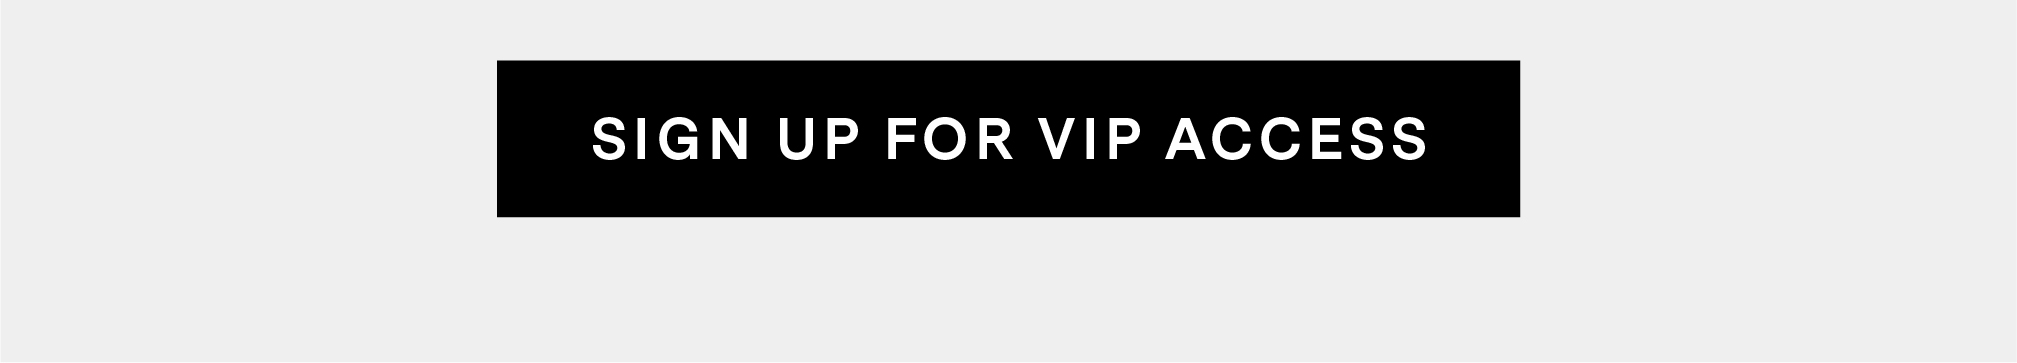 SIGN UP FOR VIP ACCESS.